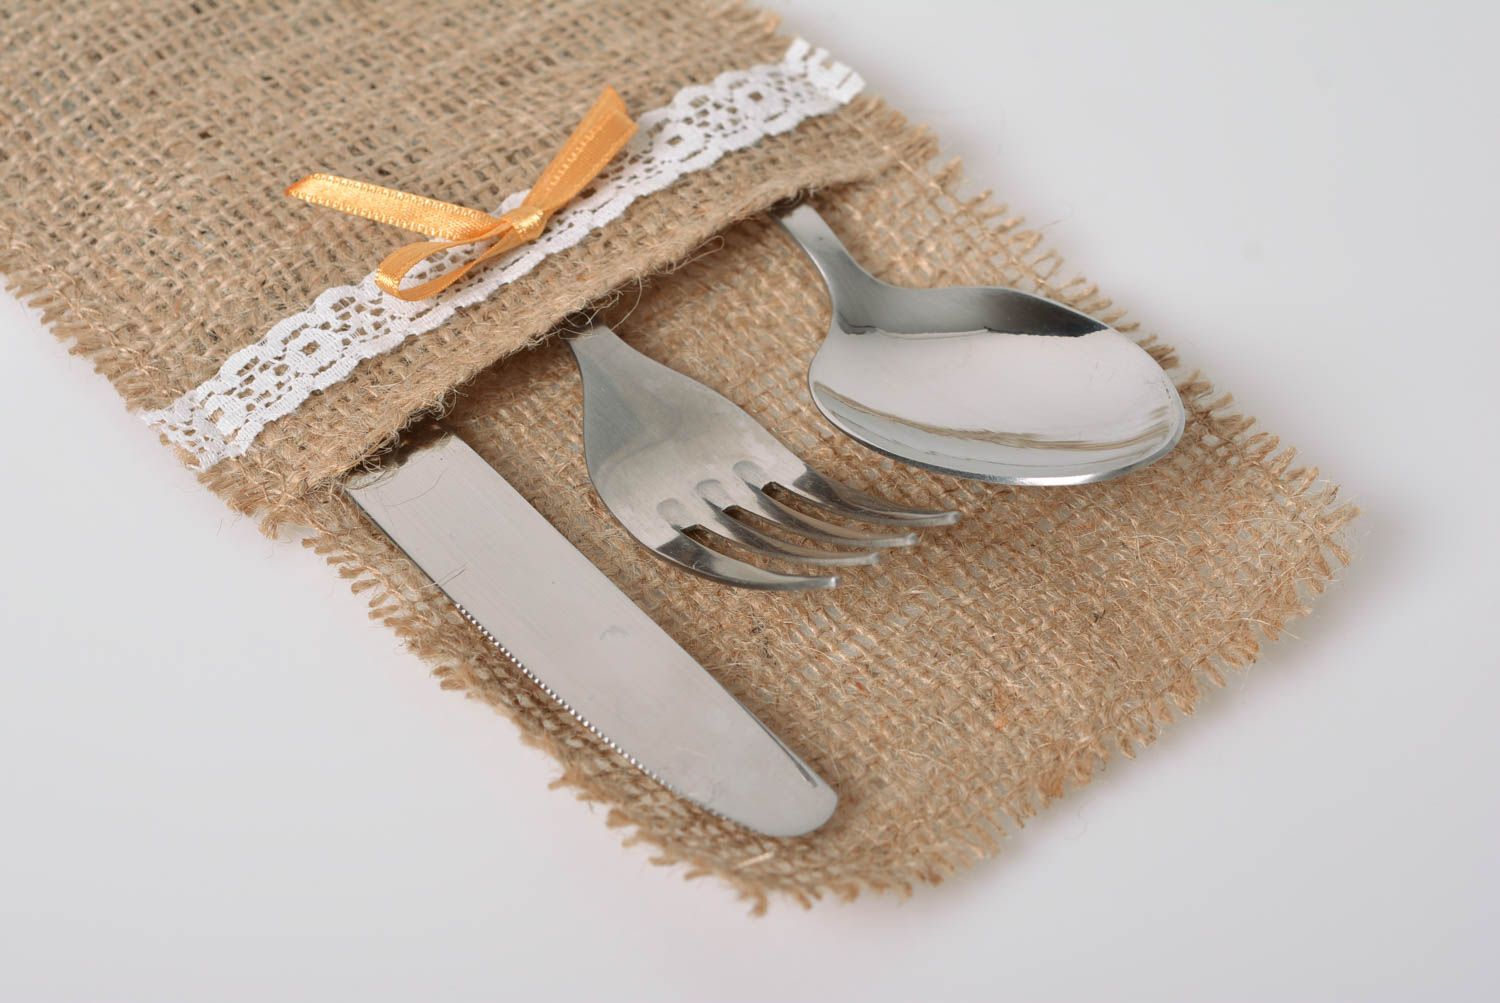 Case for cutlery made of burlap handmade beautiful kitchen decor photo 3